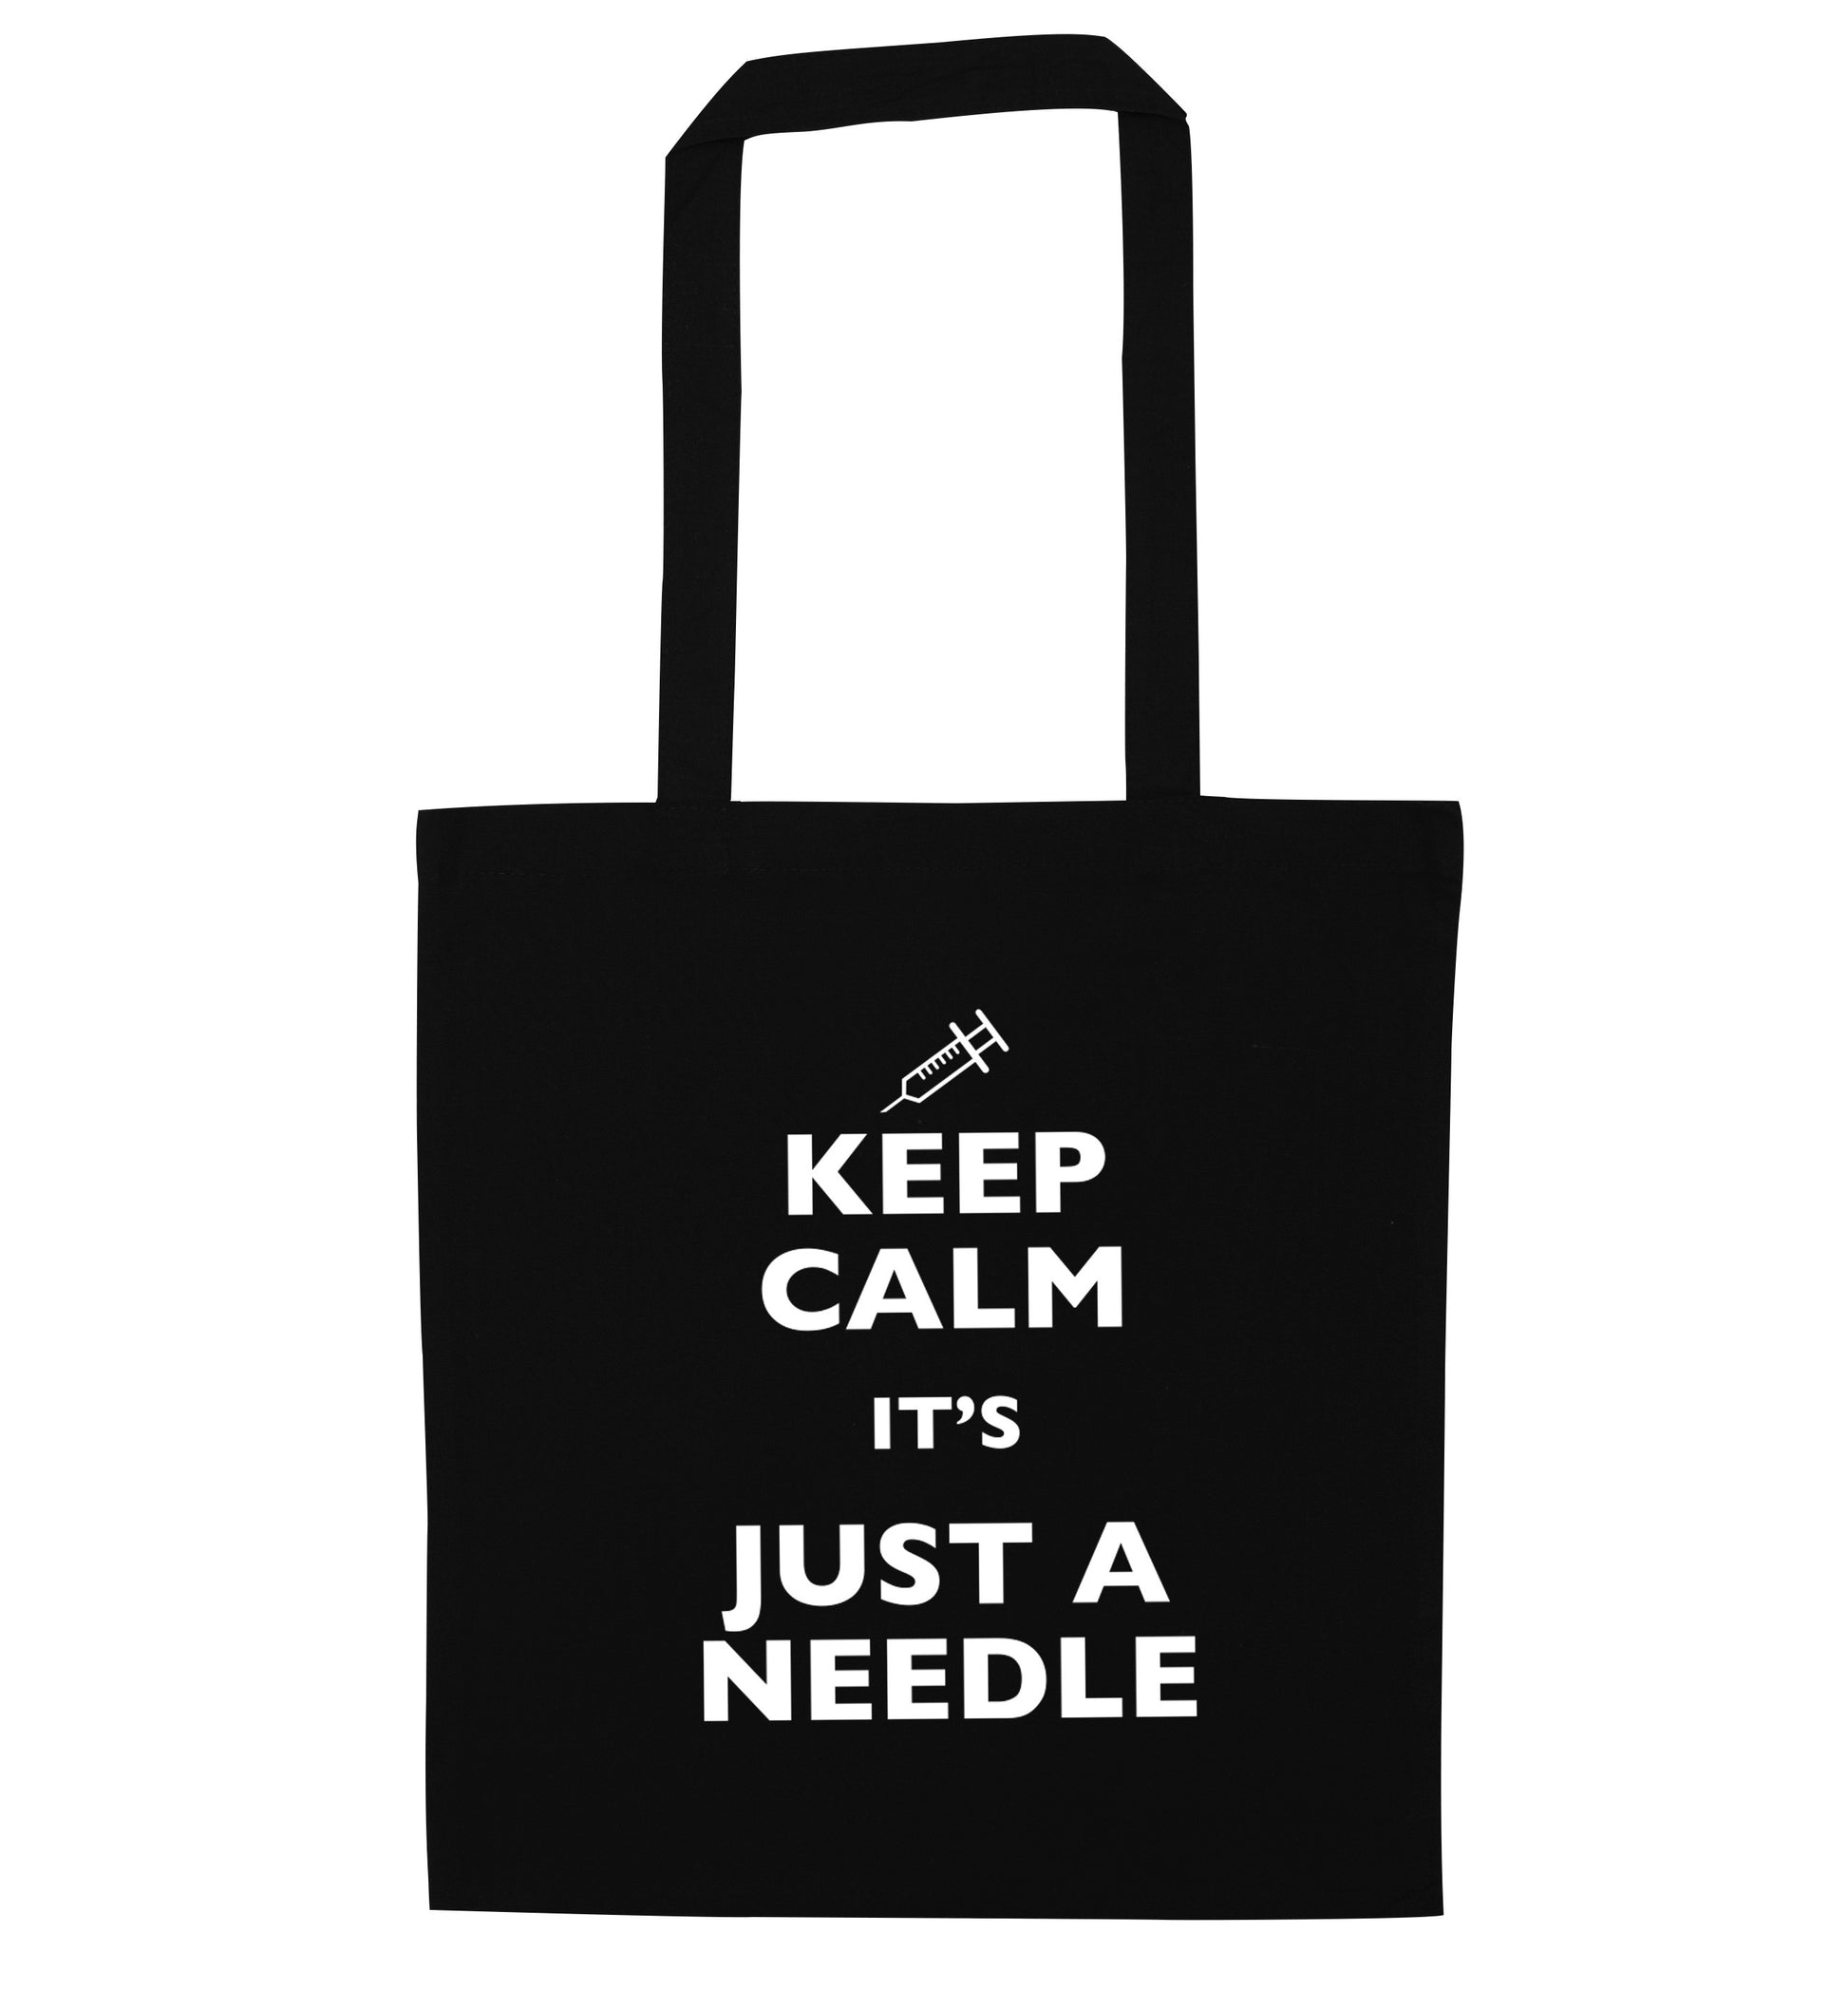 Keep calm it's only a needle black tote bag